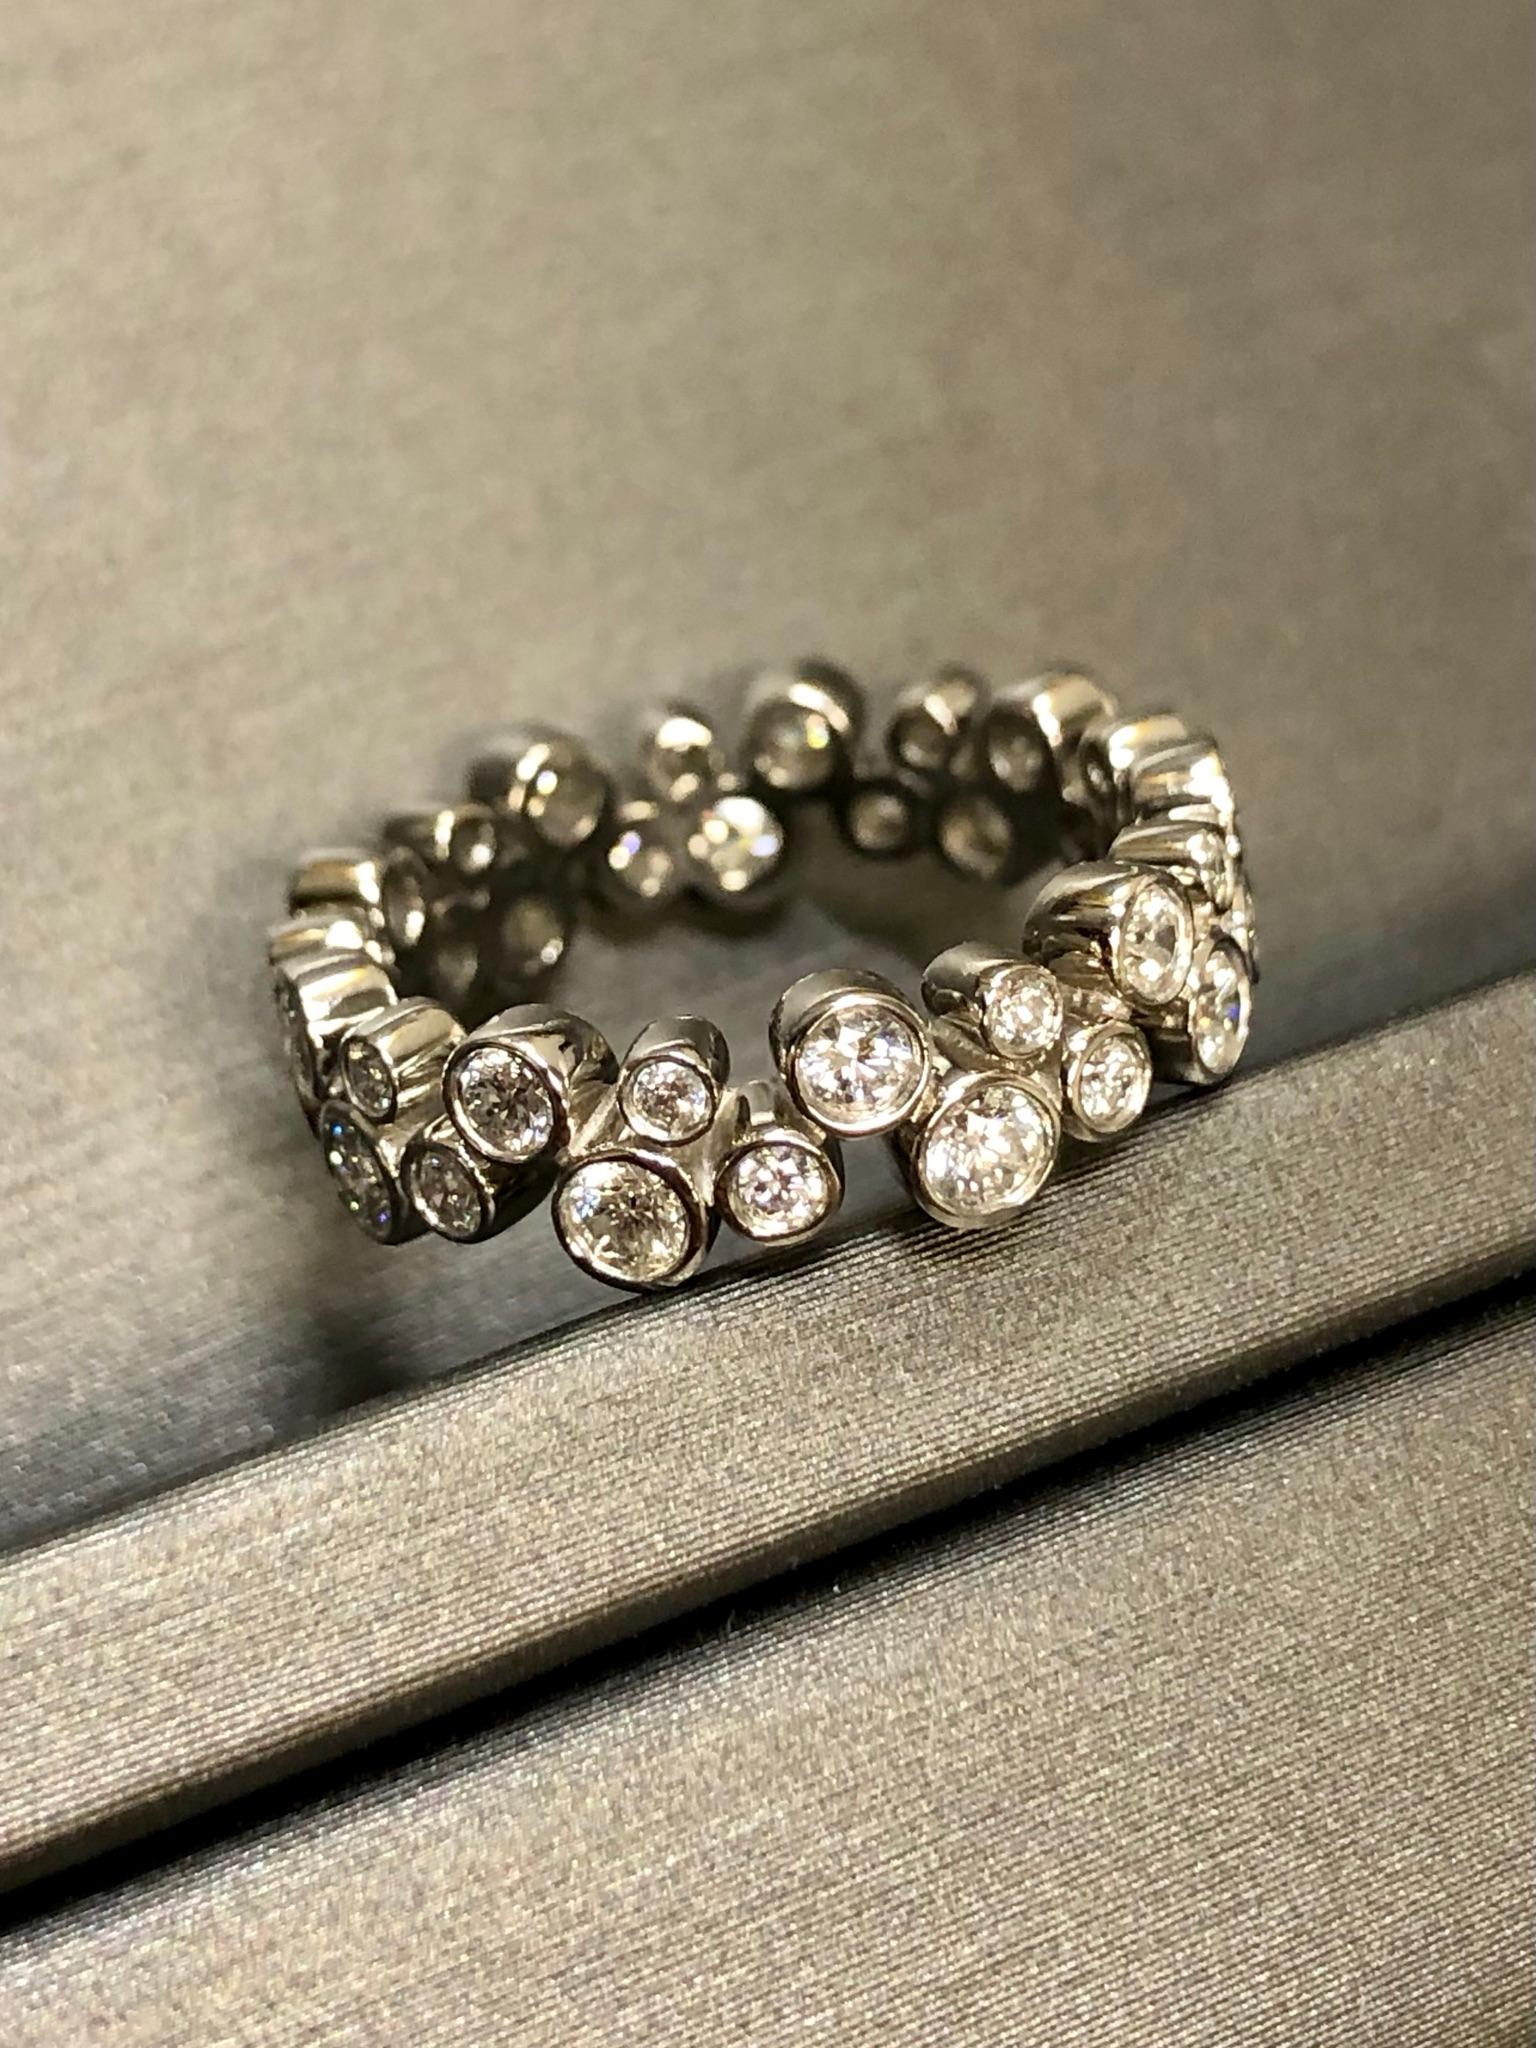 Tiffany & Co. bubbles collection eternity band done in platinum set with approximately .96cttw in diamonds. All stones are original and of Tiffany quality. The inside of the band is stamped “2004 Tiffany & Co PT 950”.


Dimensions/Weight:

Ring is a